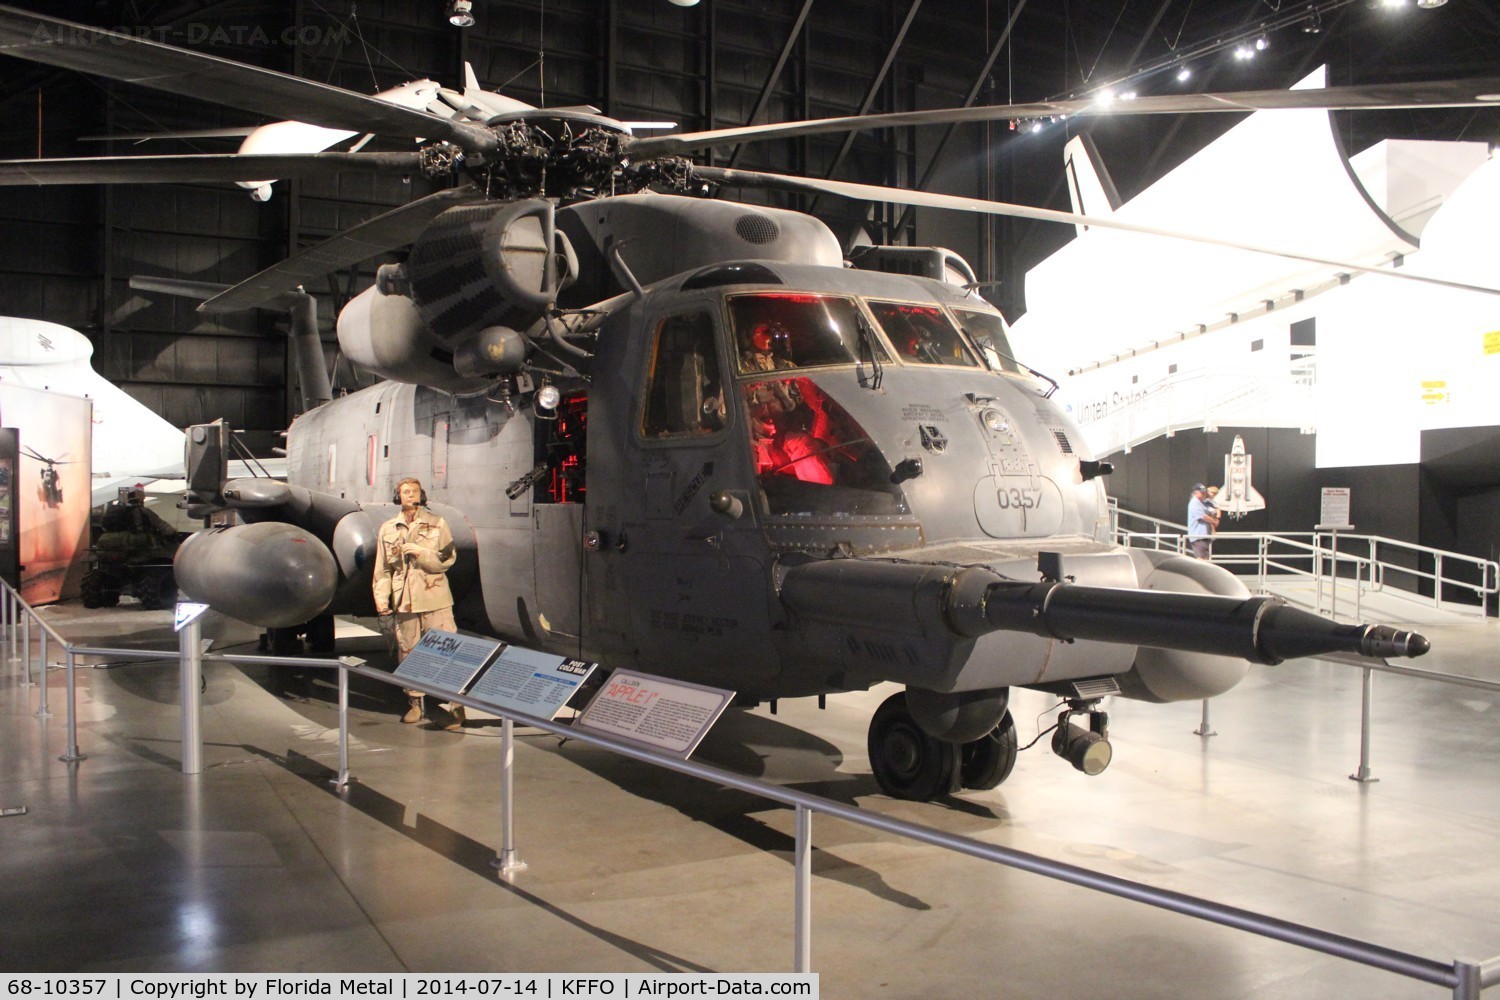 68-10357, 1968 Sikorsky MH-53M Pave Low IV C/N 65-173, MH-53 zx